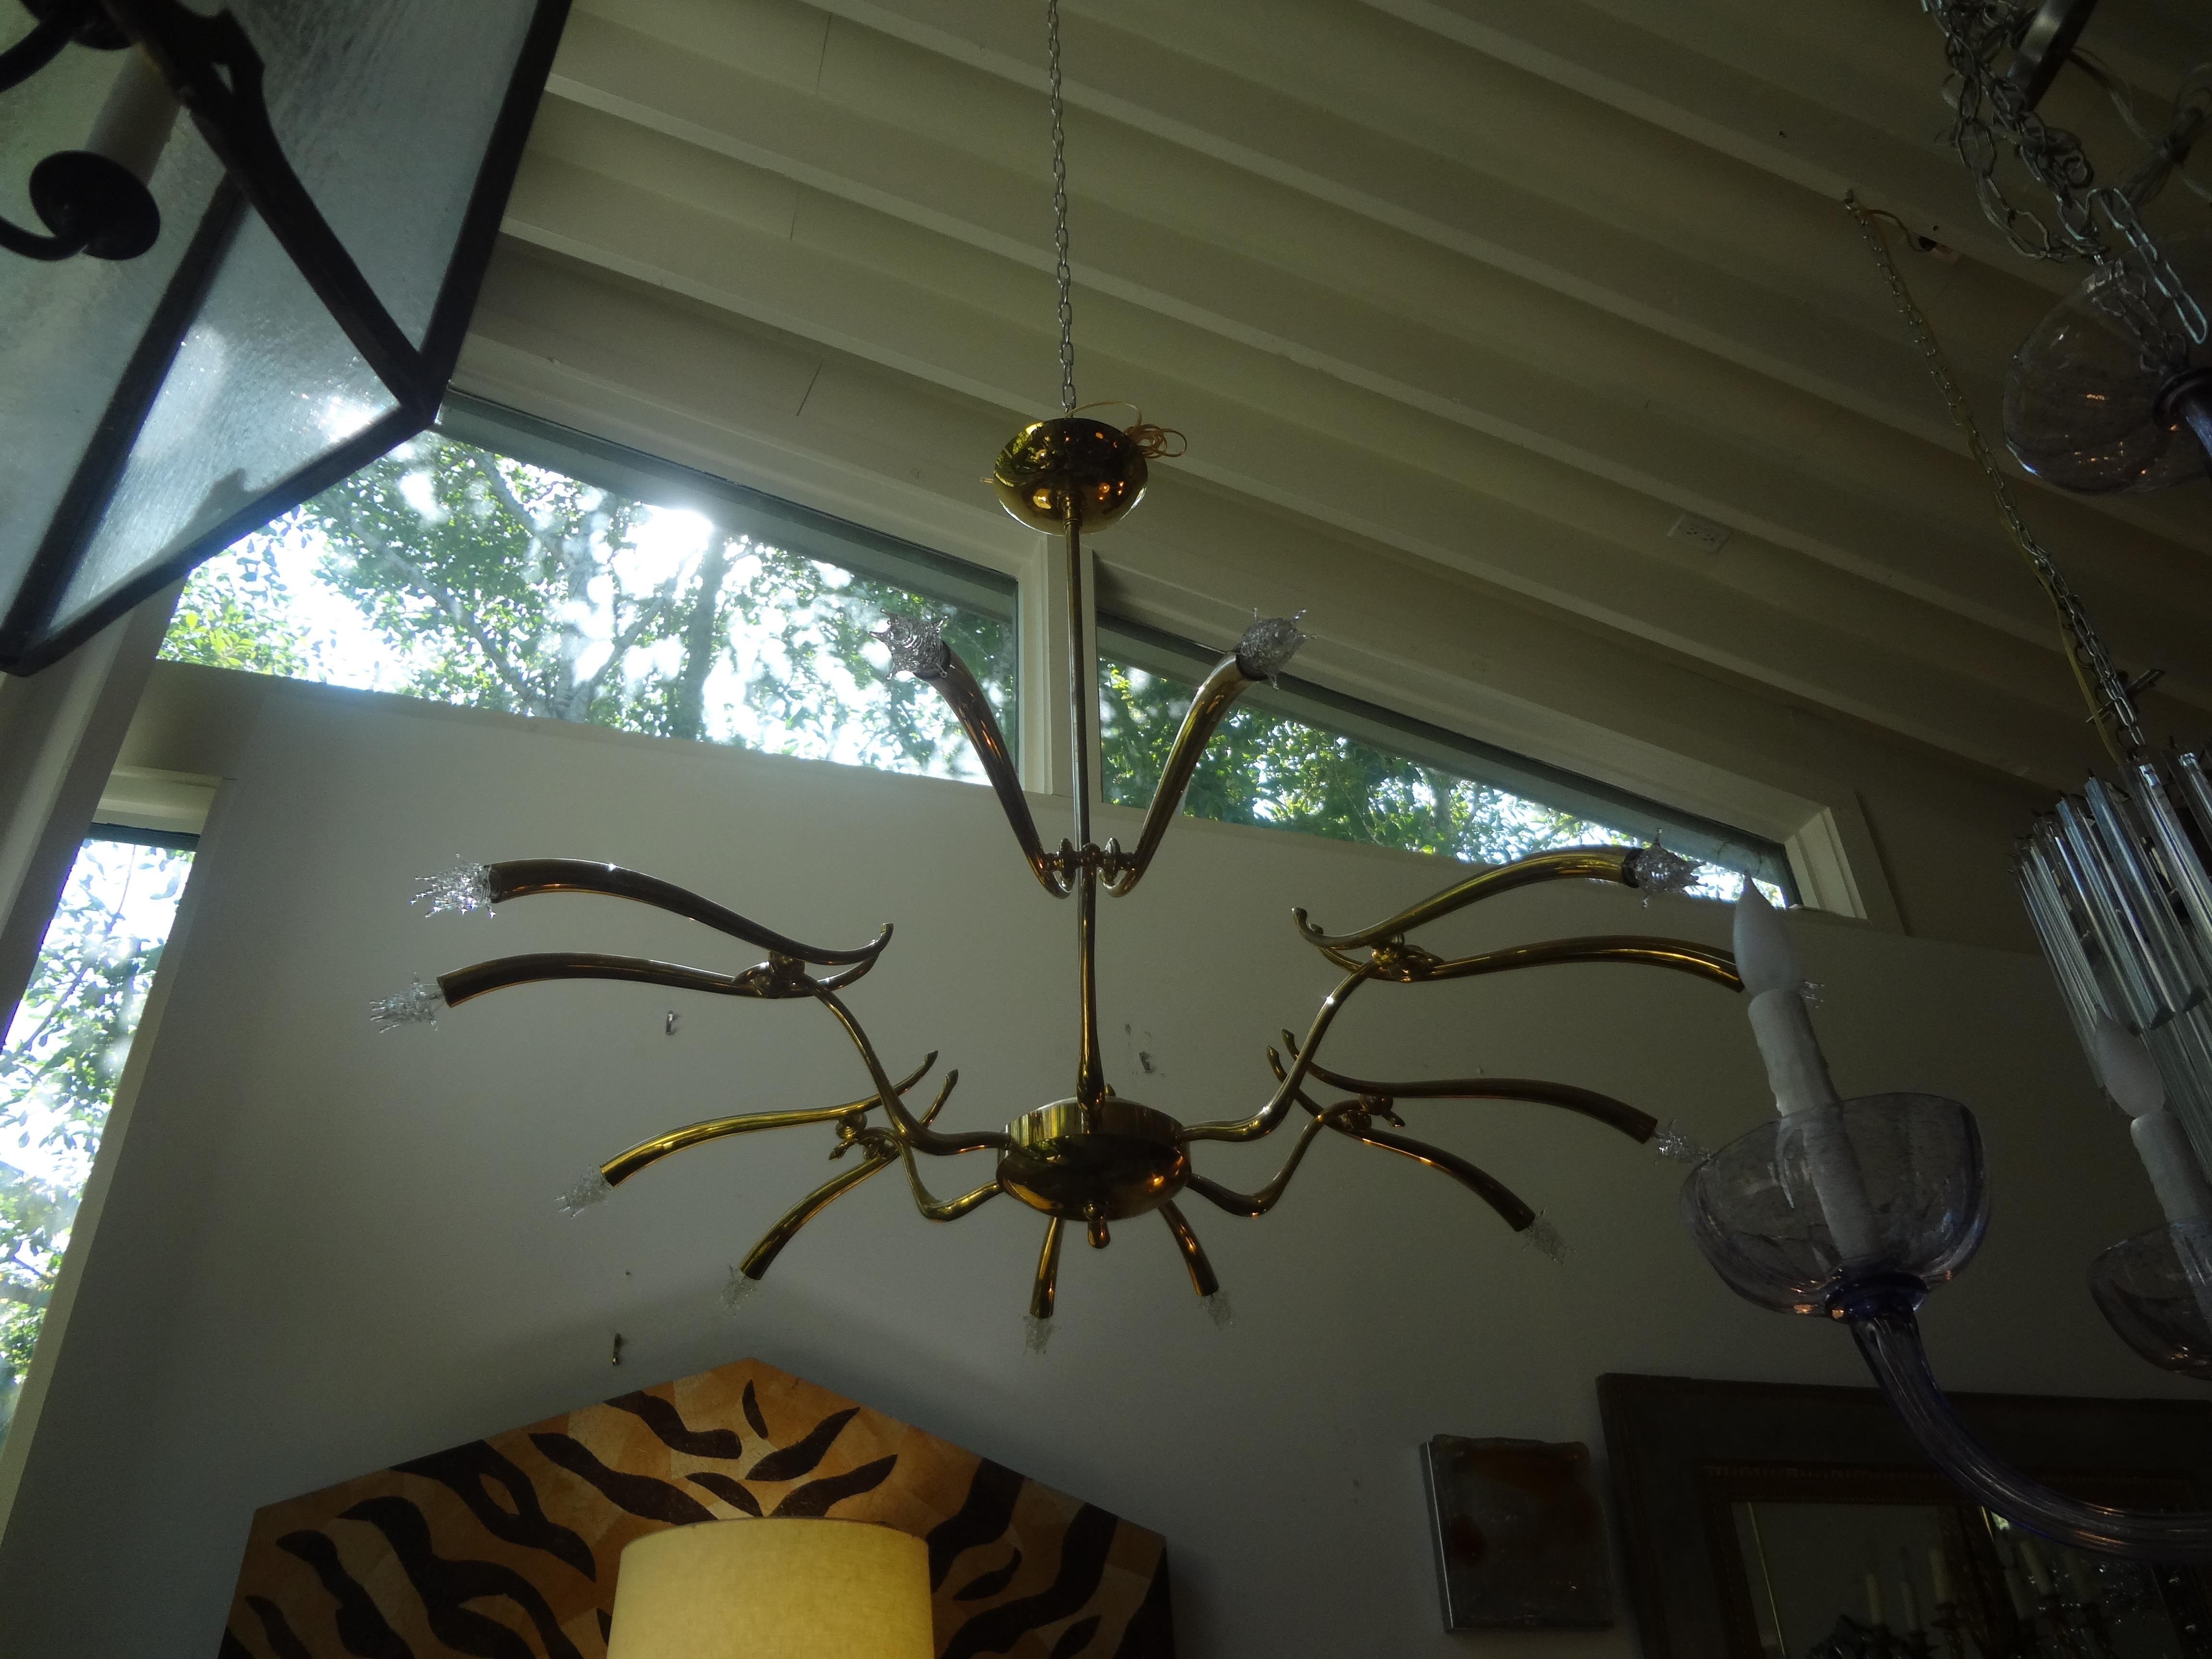 Fantastic Italian Mid-Century Modern polished brass 12-light Sputnik style chandelier attributed to Oscar Torlasco. This stunning Italian midcentury or Italian Futurist brass chandelier has been newly wired to U.S. specifications with new candelabra